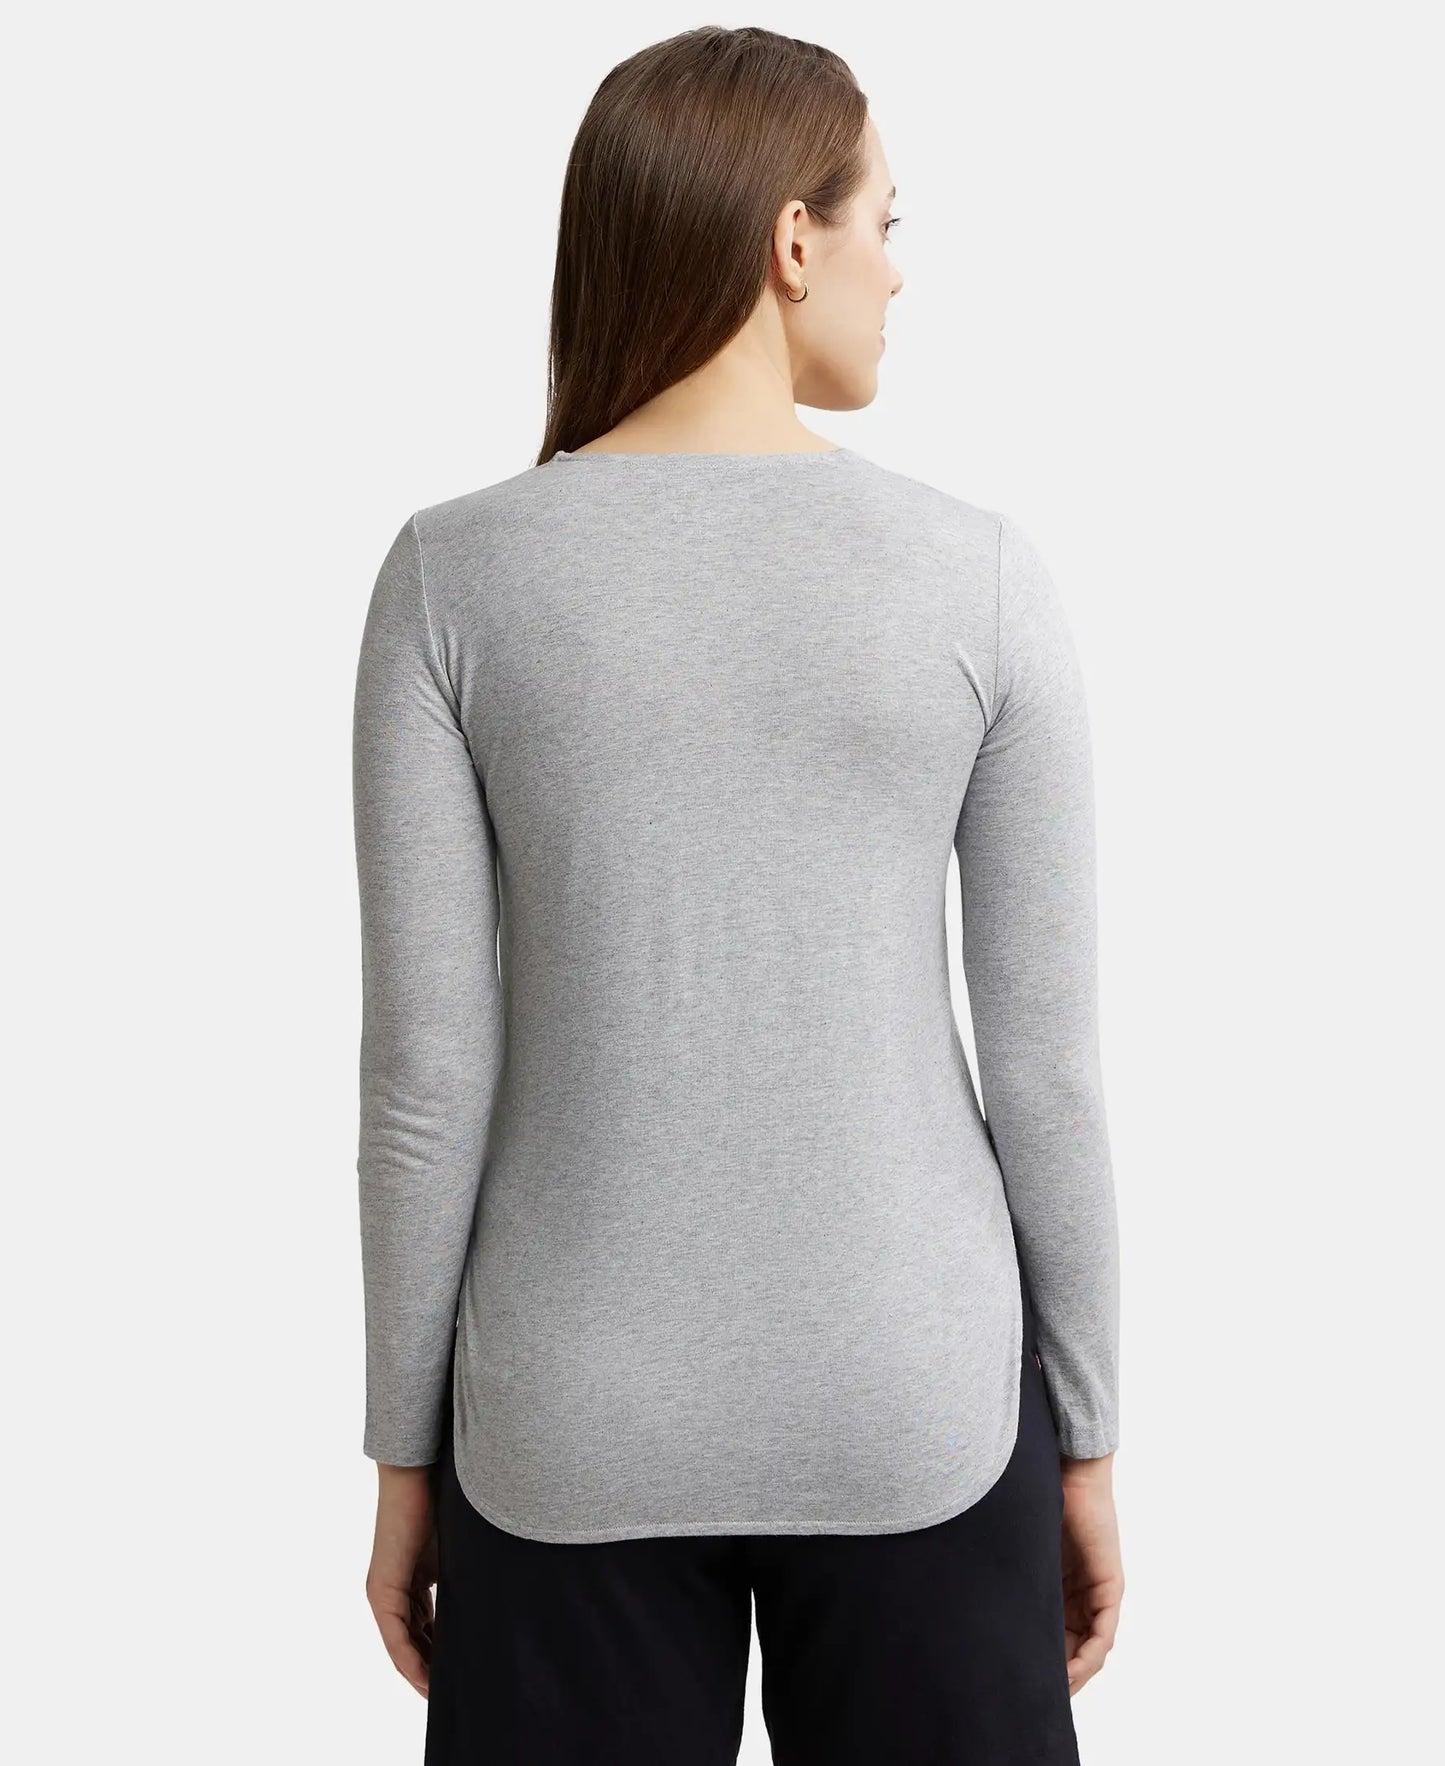 Micro Modal Cotton Relaxed Fit Solid Round Neck Full Sleeve T-Shirt with Curved Hem Styling - Light Grey Melange-3